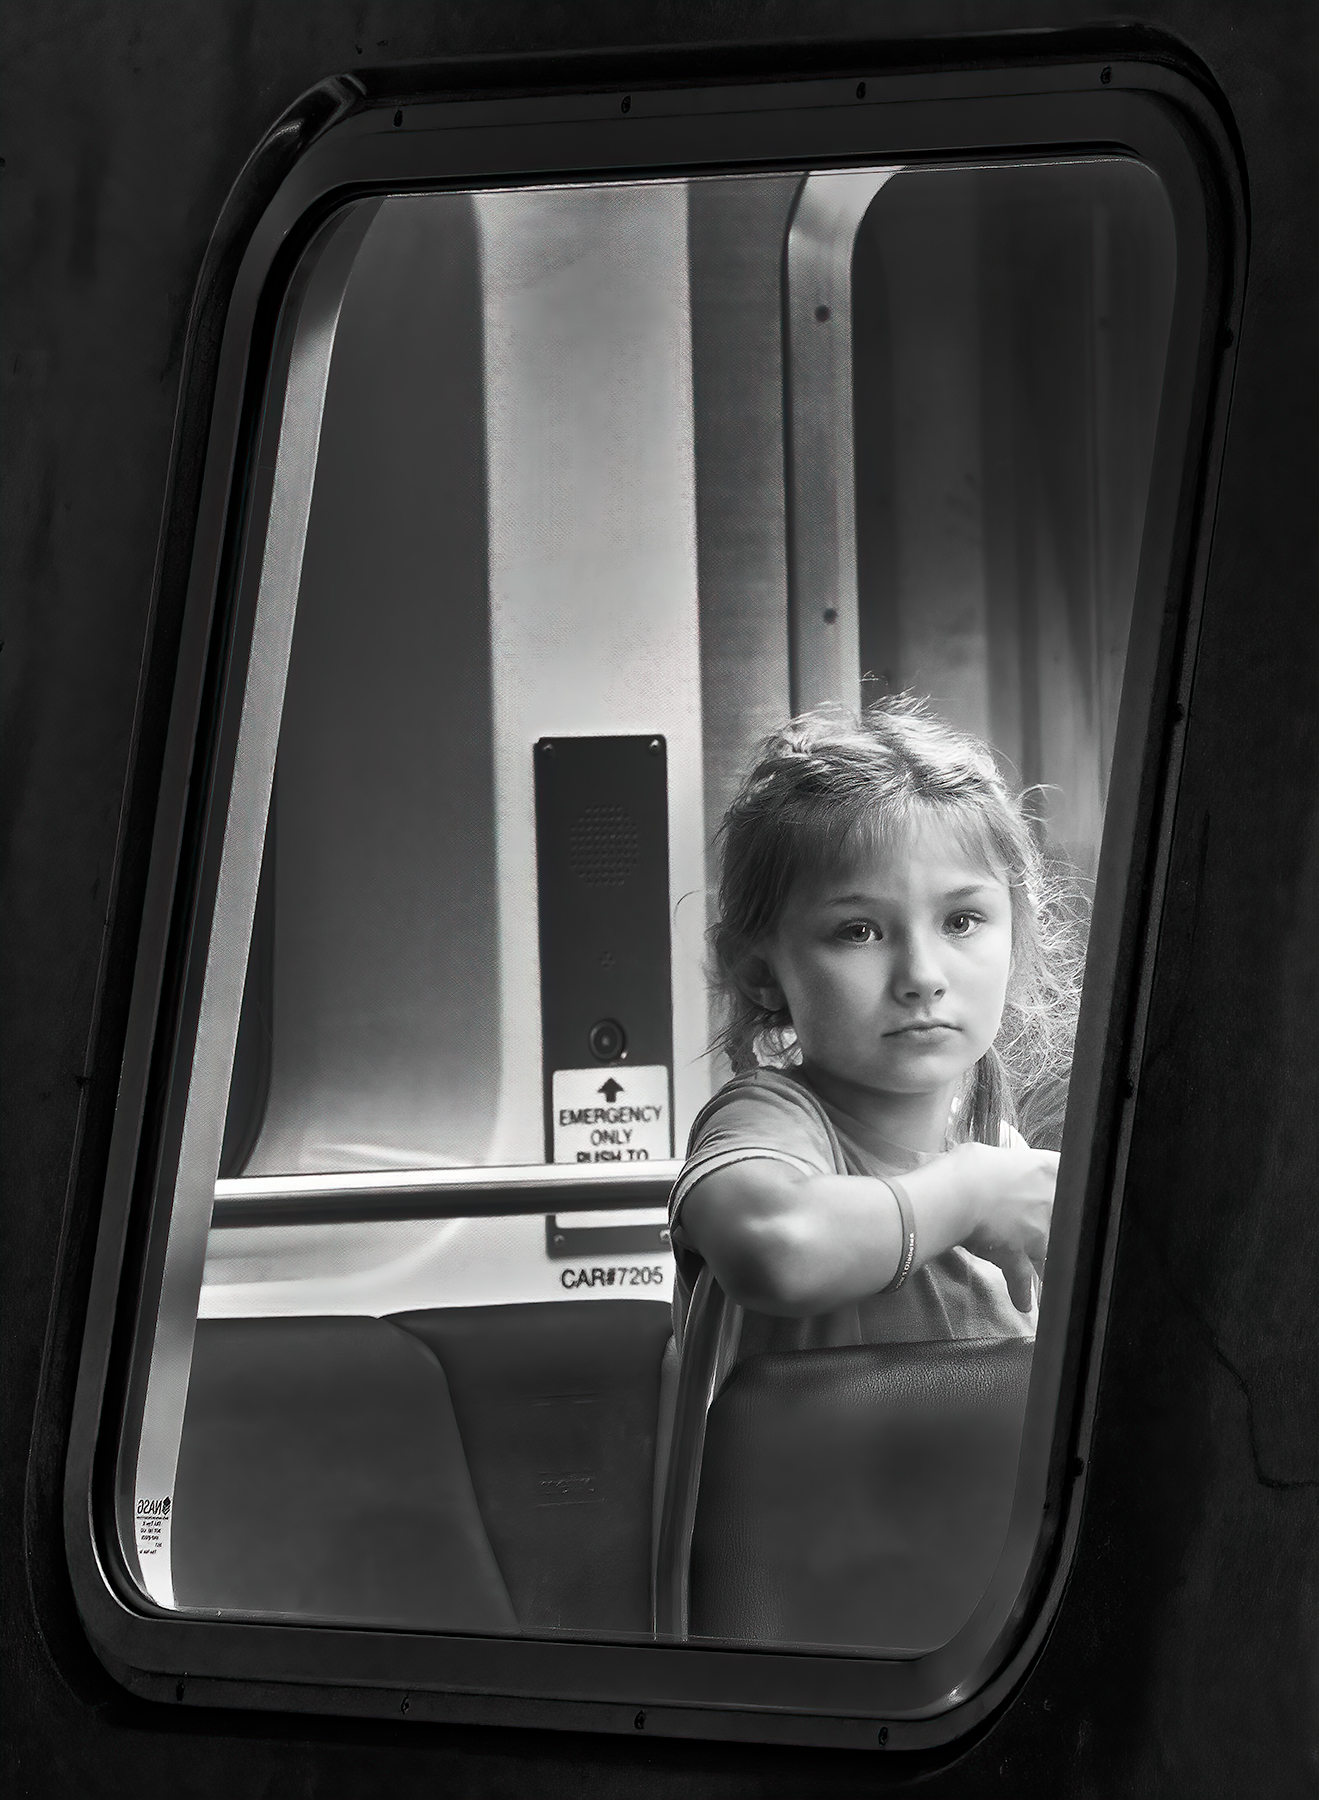 2nd Place:  Dennis Chambers "Alone on the Train"